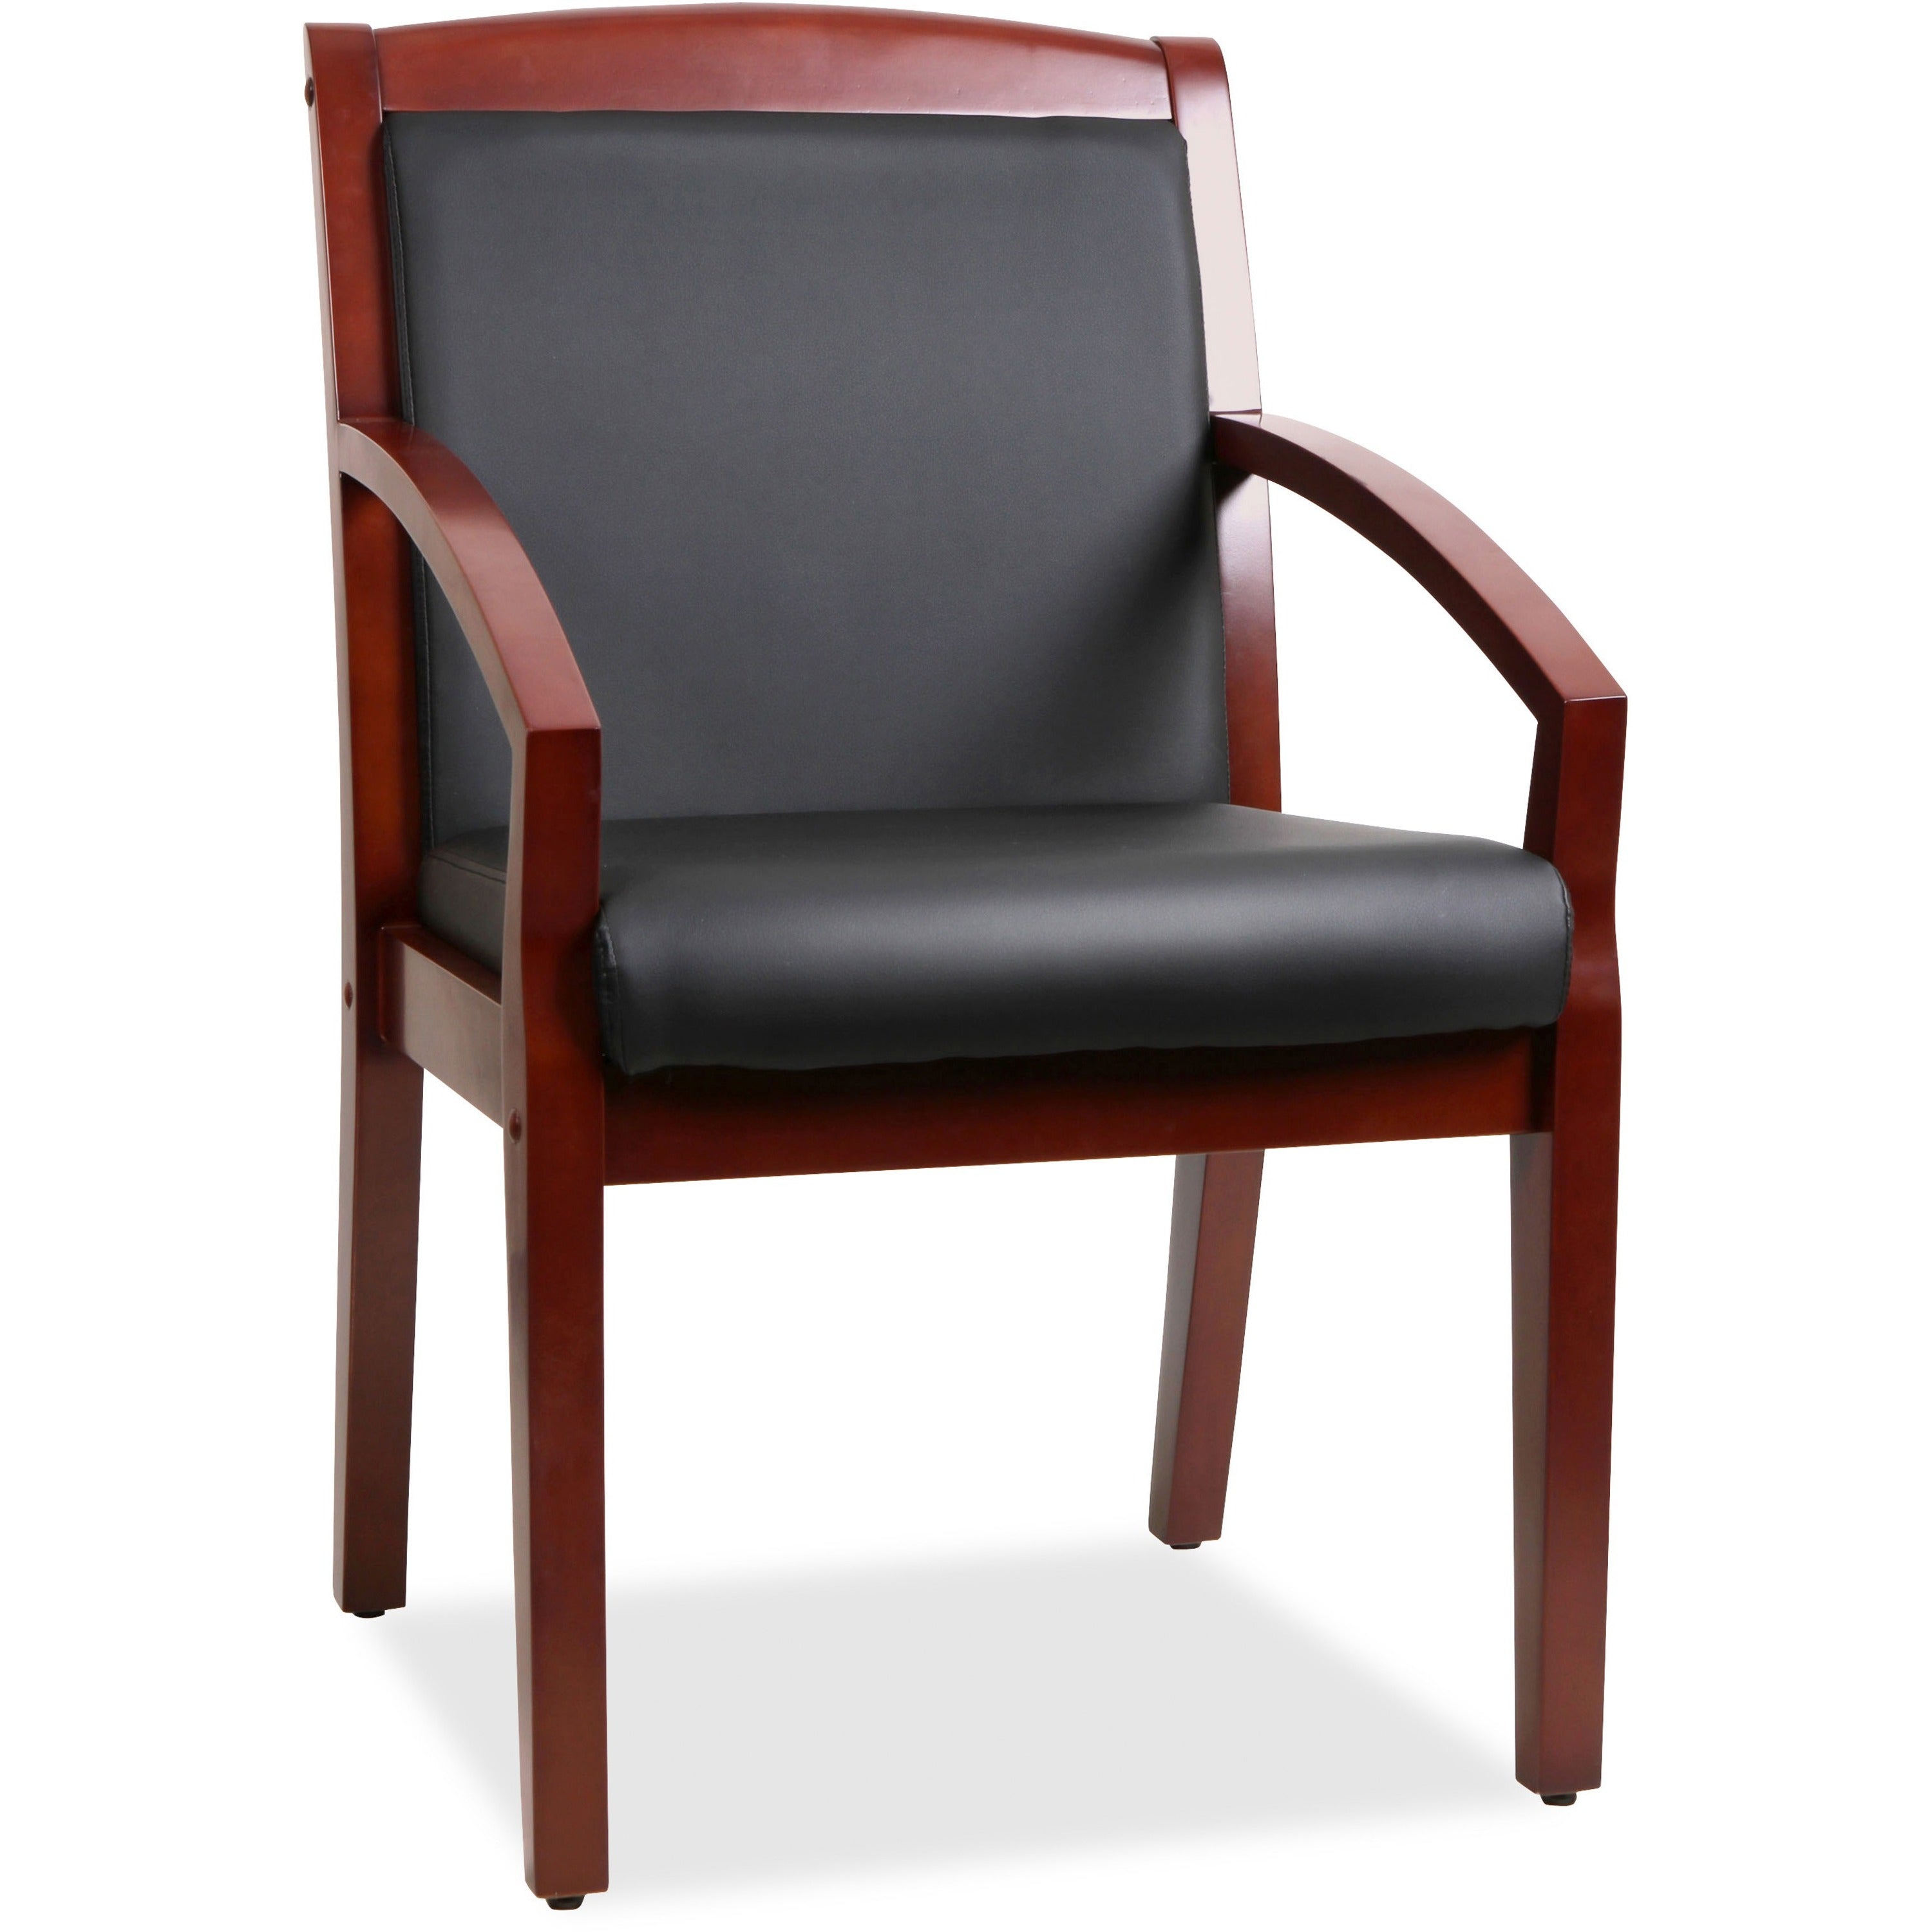 Lorell Sloping Arms Wood Frame Guest Chair - Black Bonded Leather Seat - Black Bonded Leather Back - Cherry Wood Frame - Four-legged Base - 1 Each - 